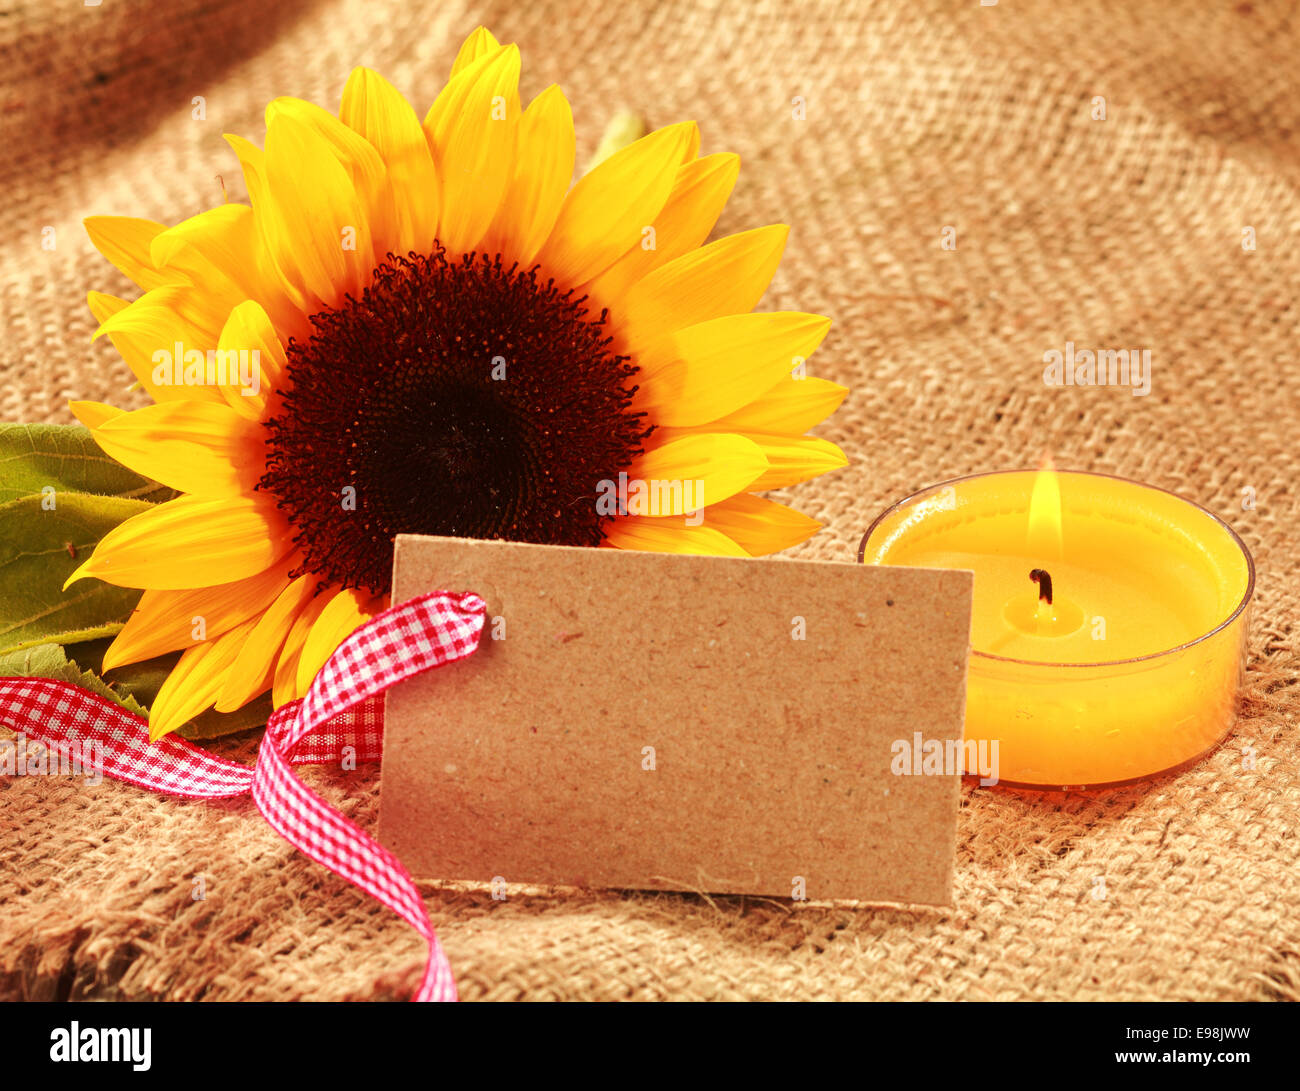 Festive Christmas sunflower background with a vibrant yellow fresh sunflower and burning orange candle with a blank gift tag or Stock Photo